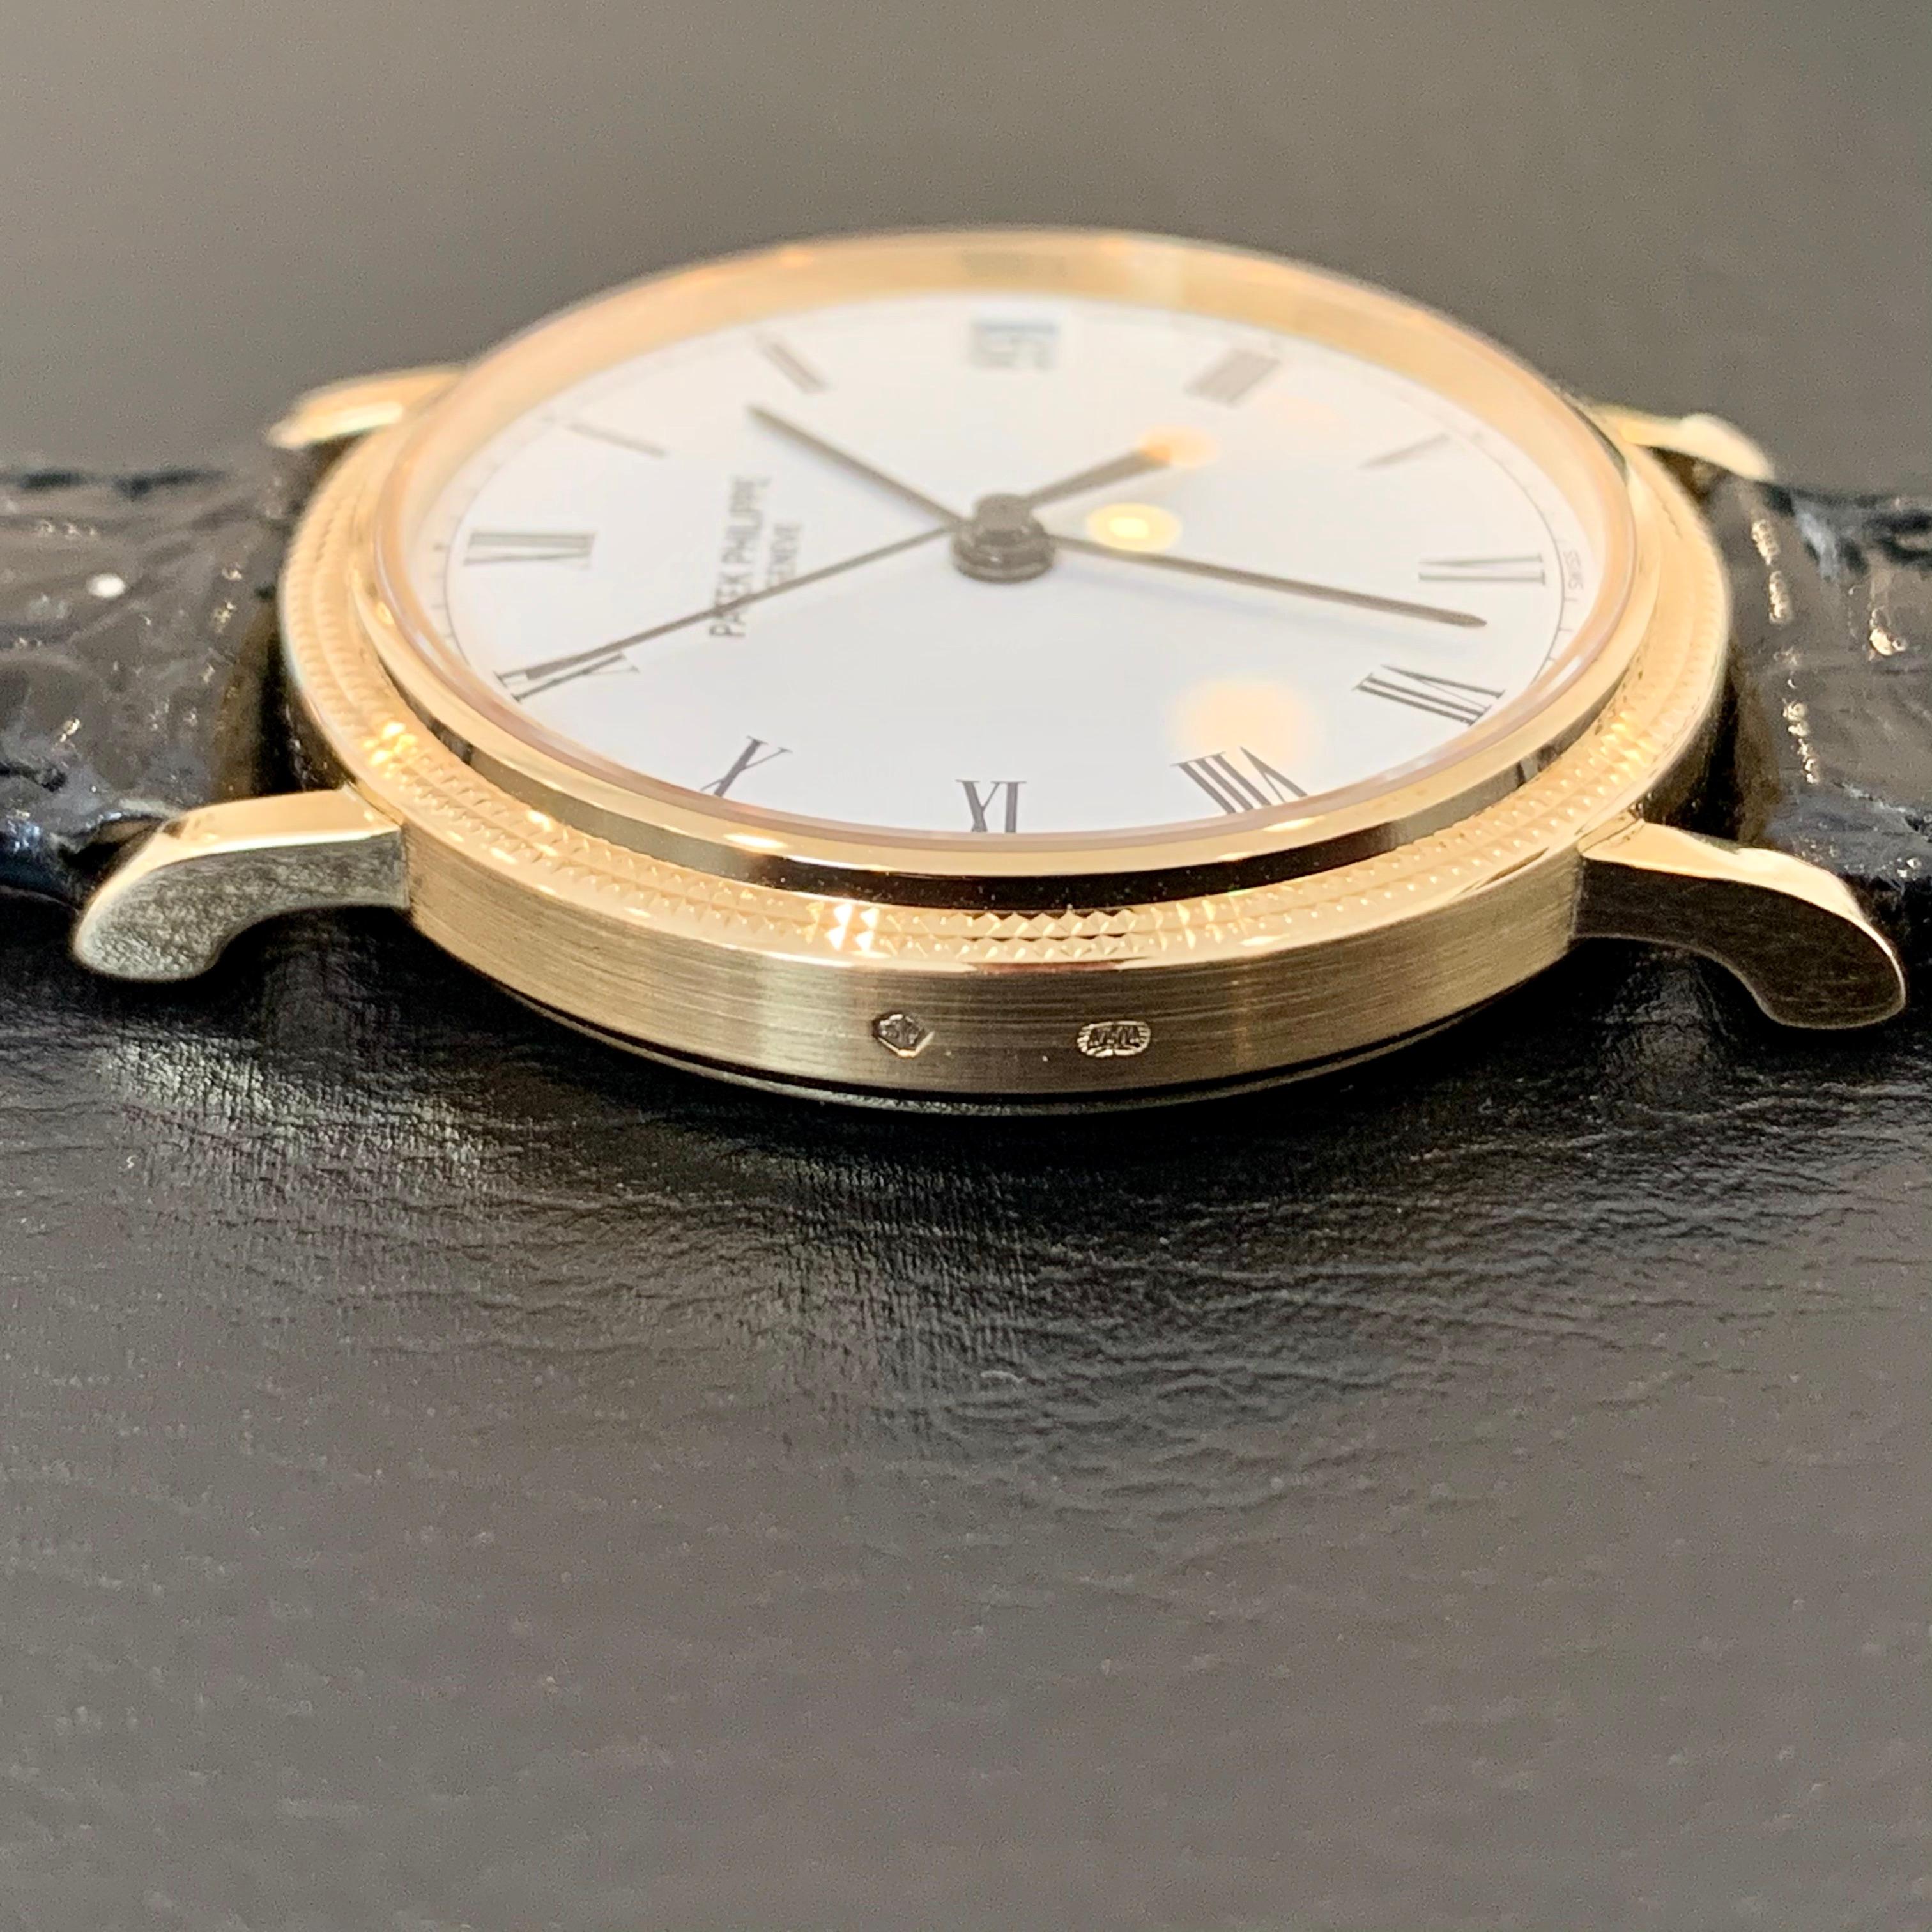 Elegant 18K Gold watch by Patek Philippe. Calatrava 3802. Original papers included. Mens. Automatice. Self-wind. Original band, stamped Patek Philippe on backside of leather. Near mint condition as shown in photos. Originally purchased circa 2002. 